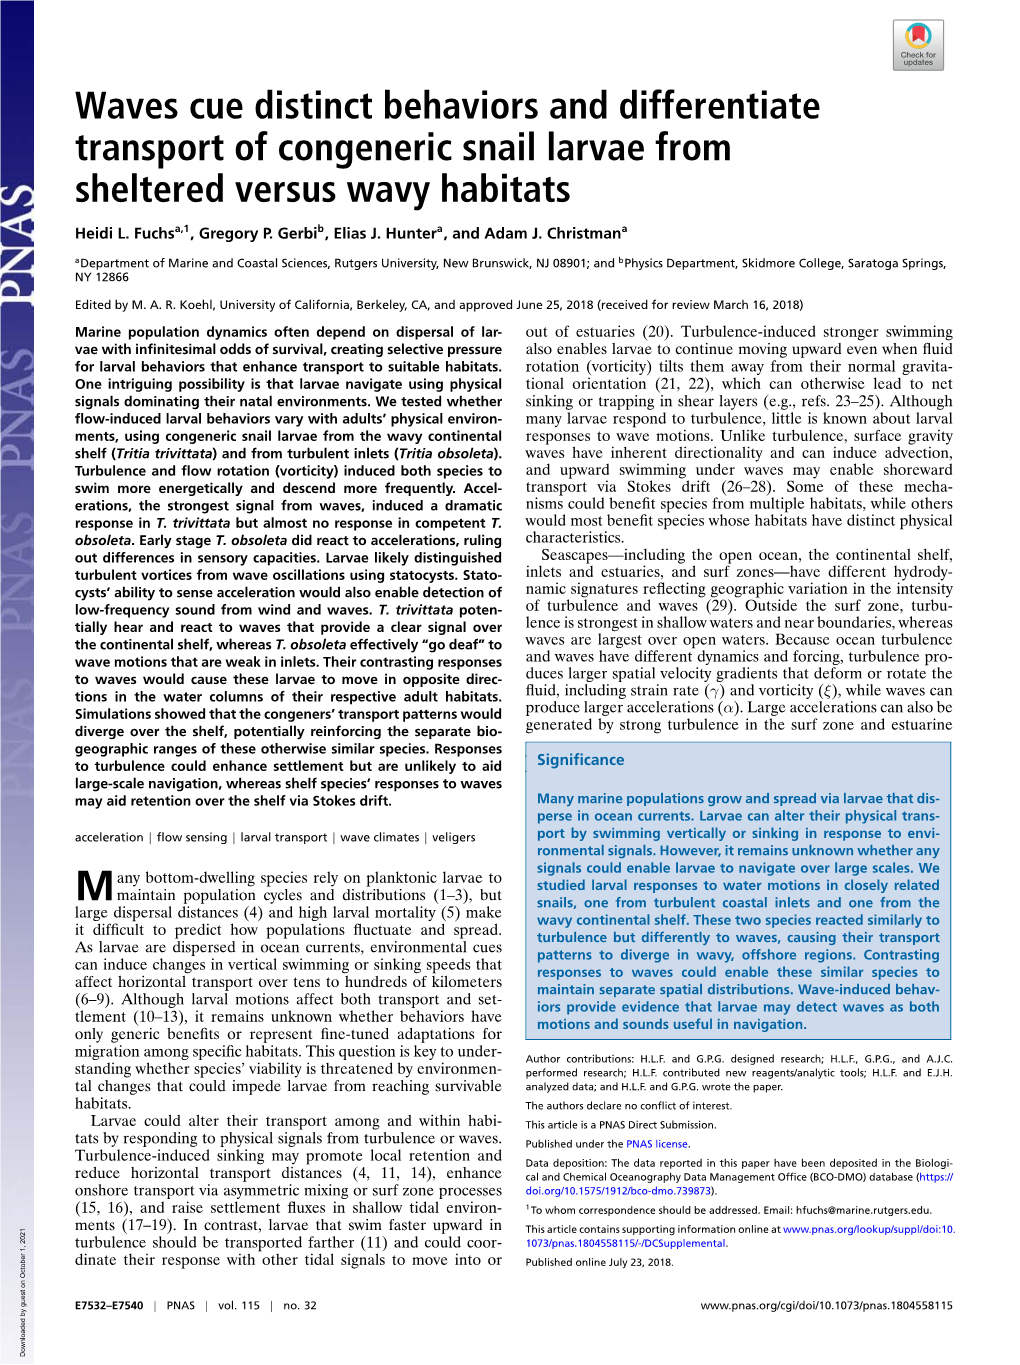 Waves Cue Distinct Behaviors and Differentiate Transport of Congeneric Snail Larvae from Sheltered Versus Wavy Habitats